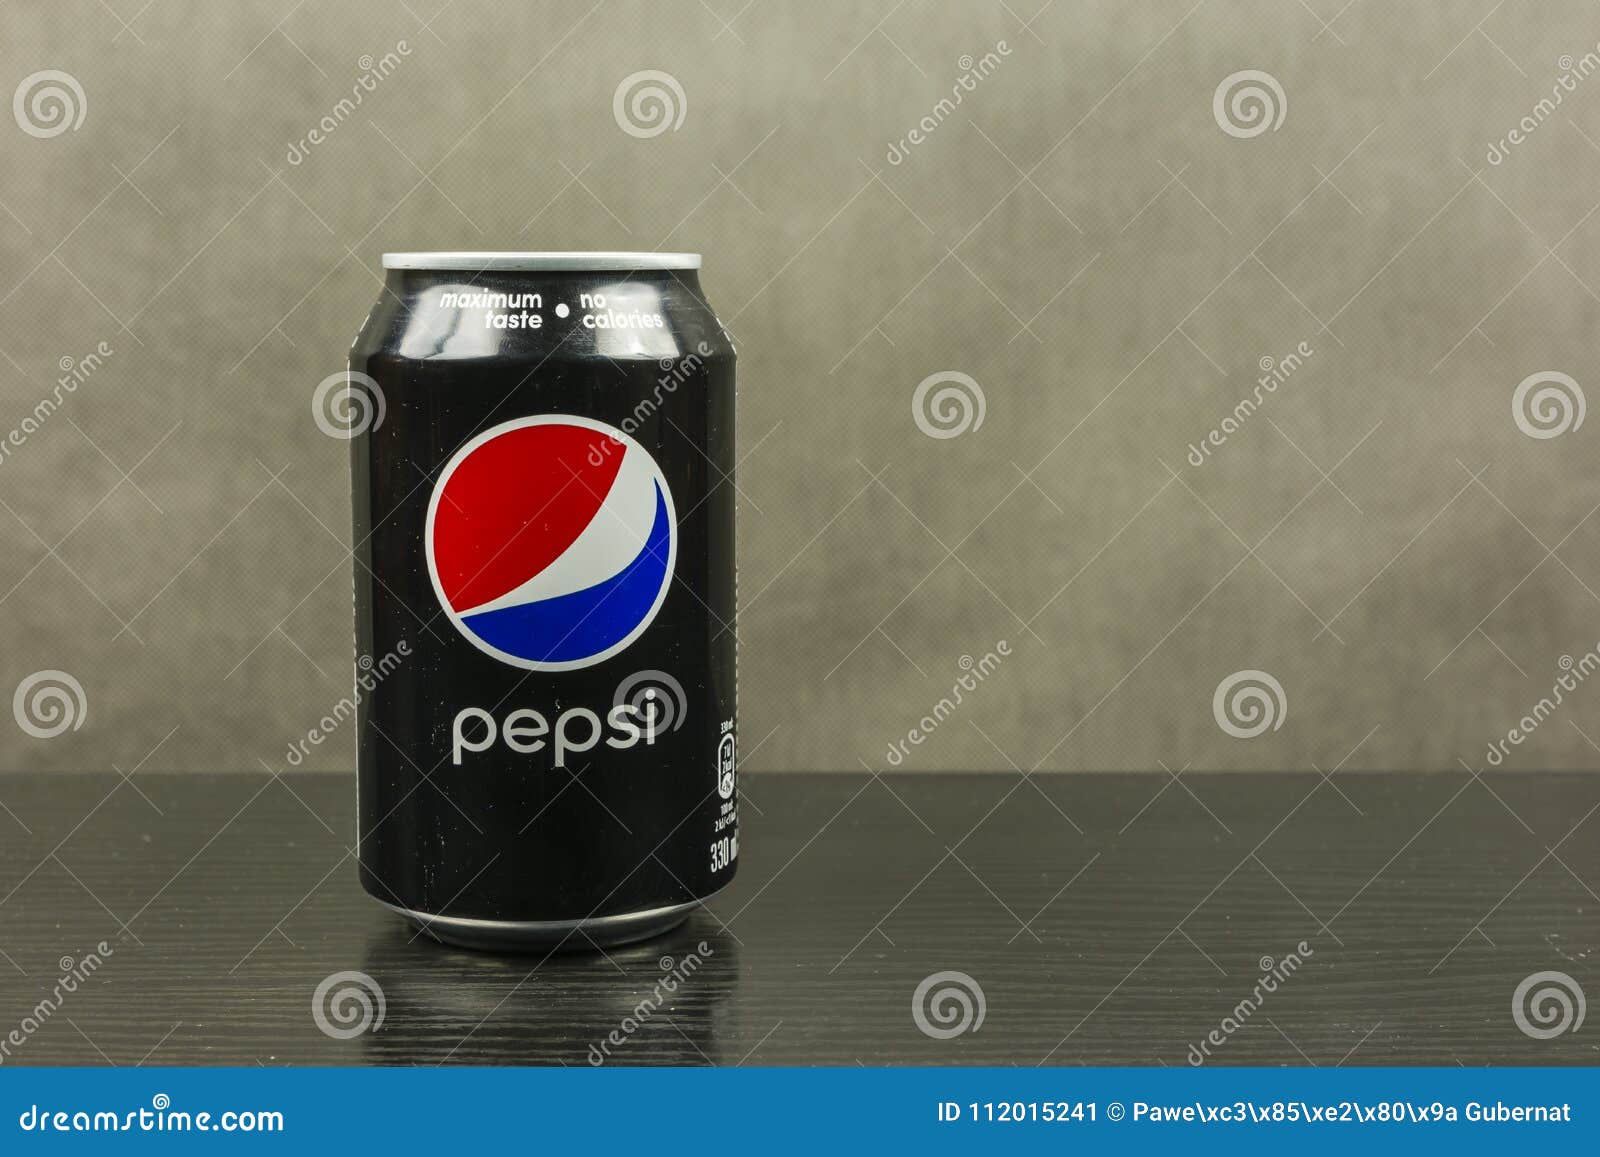 A Can of Pepsi Max Pepsi Black. Editorial Photo - Image of advertising ...